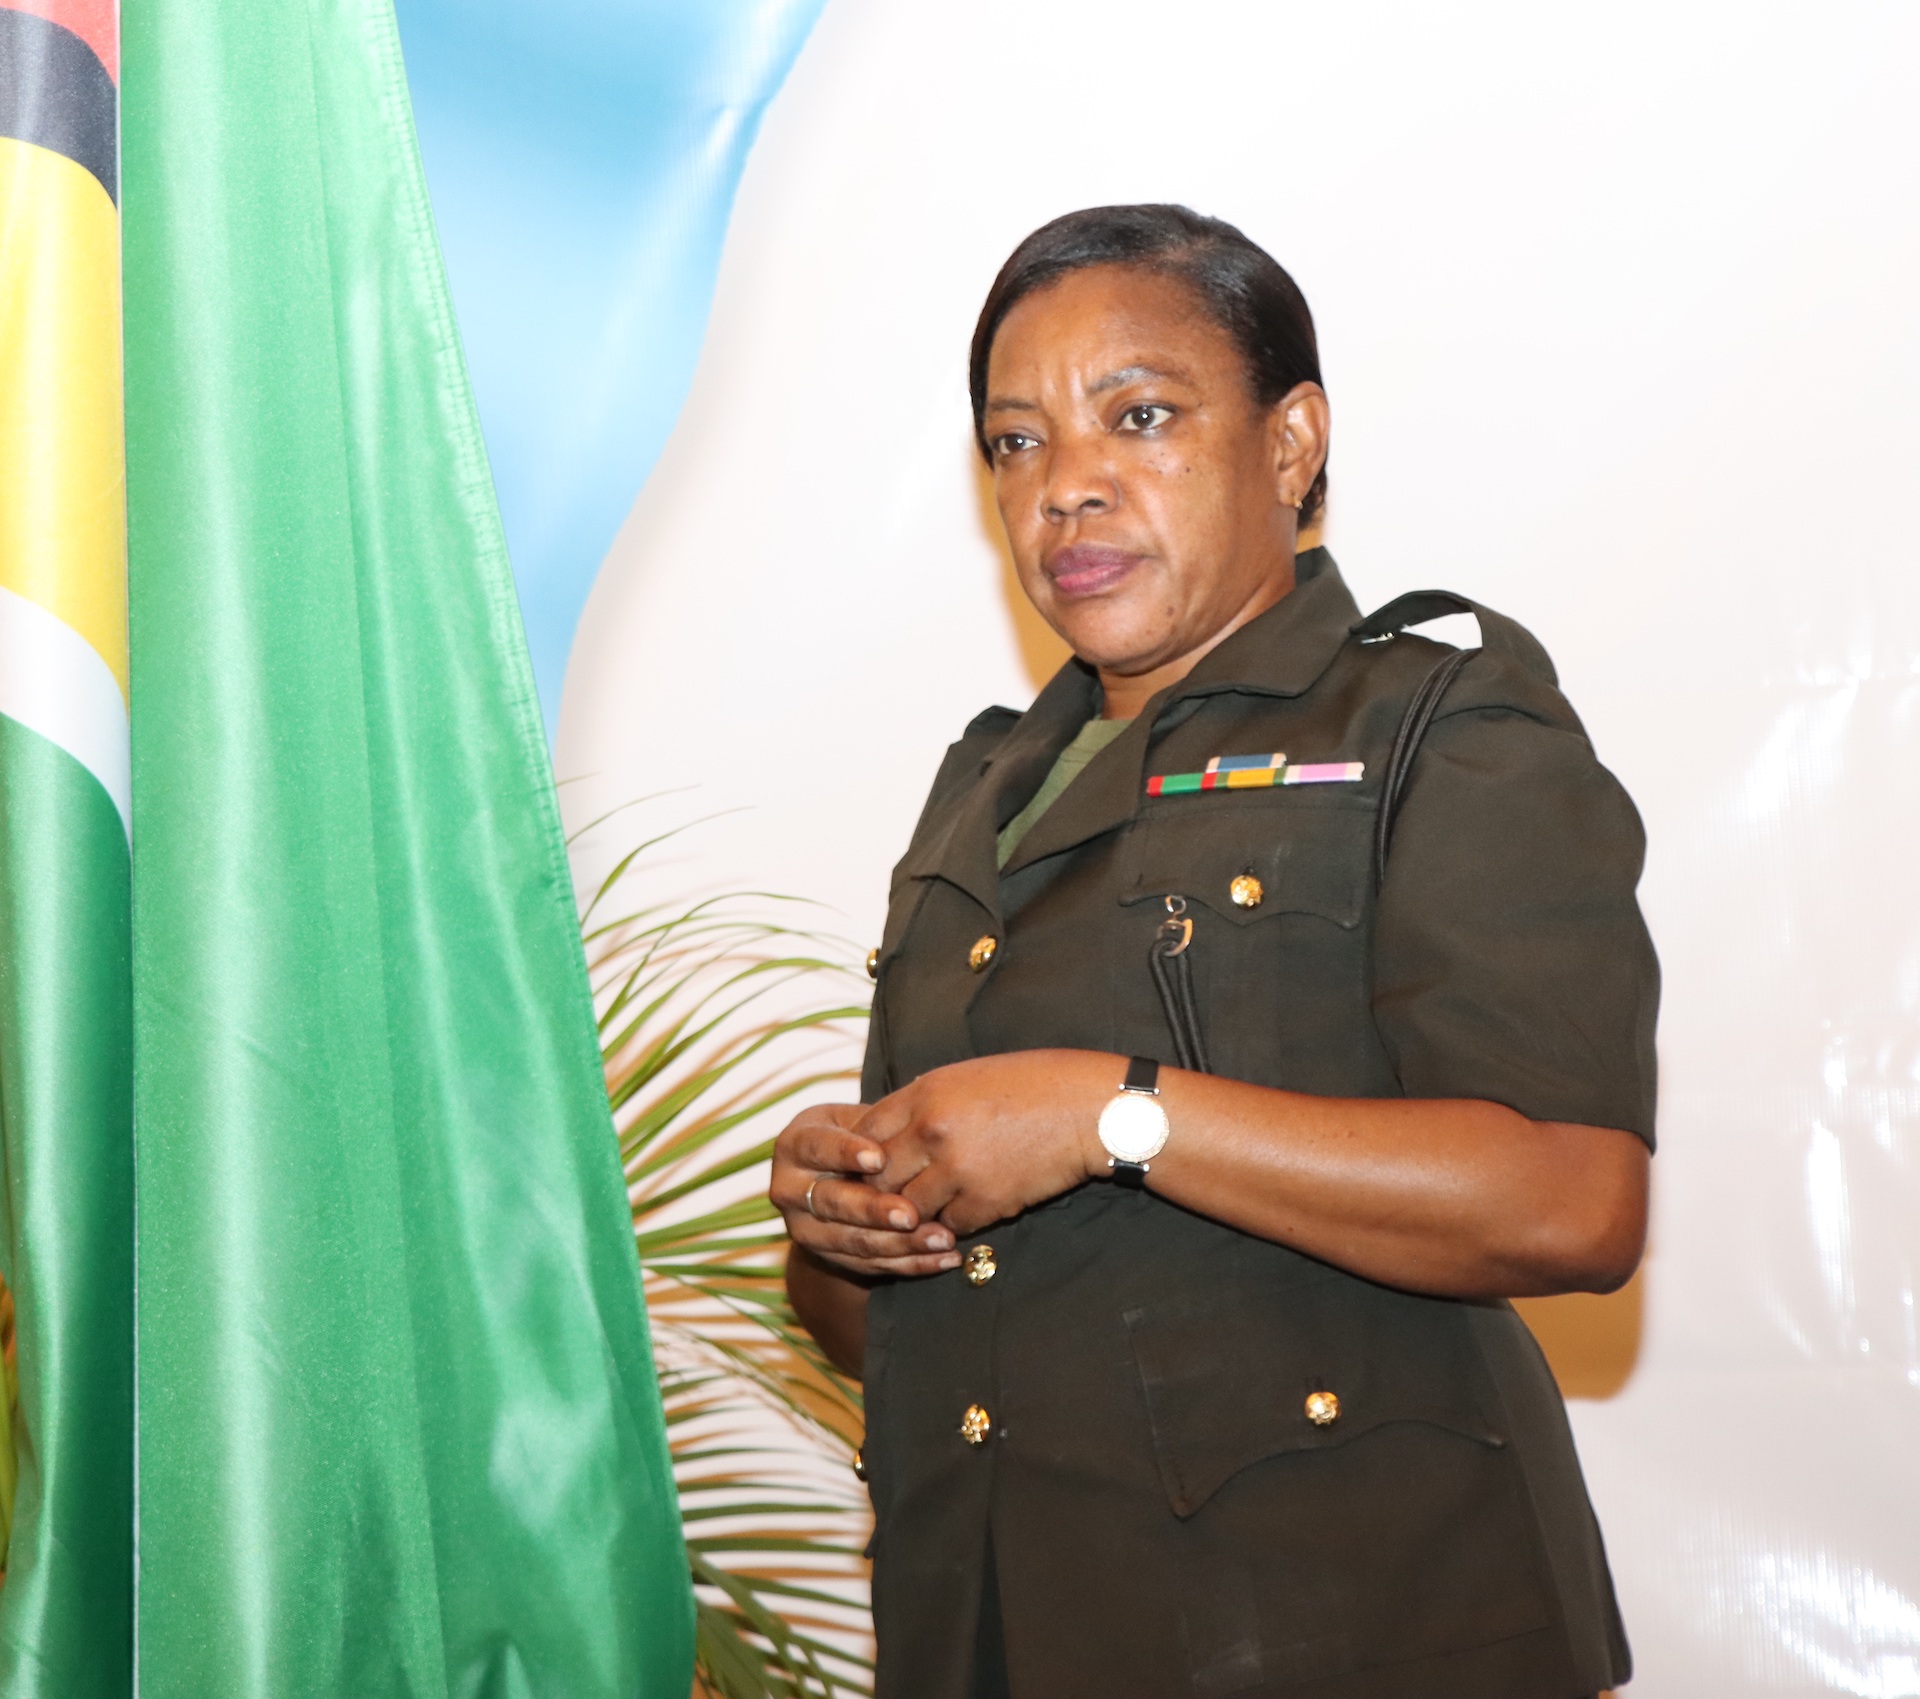 ‘I Serve my Country With Diligence and Pride’